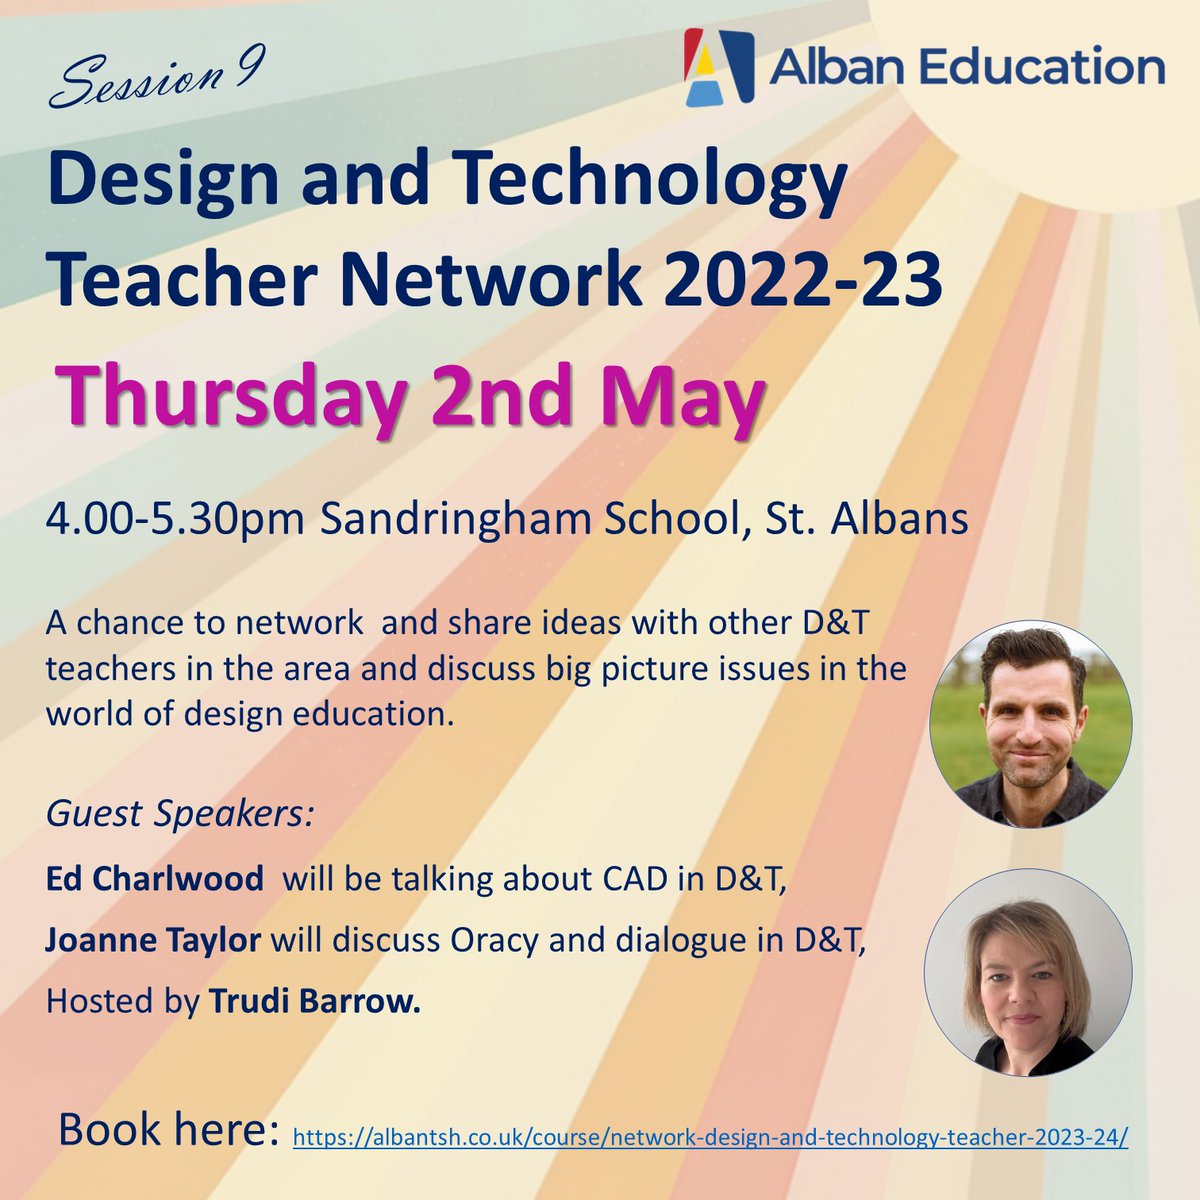 Next week! 9th event! Edward Charlwood will talk about CAD & Joanne Taylor will talk about oracy and dialogue in D&T.@AlbanTSH @HBS_DT @KWS @SRA_StAlbans @Bloomfield_C @Verulam_Tech @MrScott_T @cottesloeschool @AdeyfieldSchool @mrsm2019 @NBS_Herts @DTsandringham @Roundwood_Park